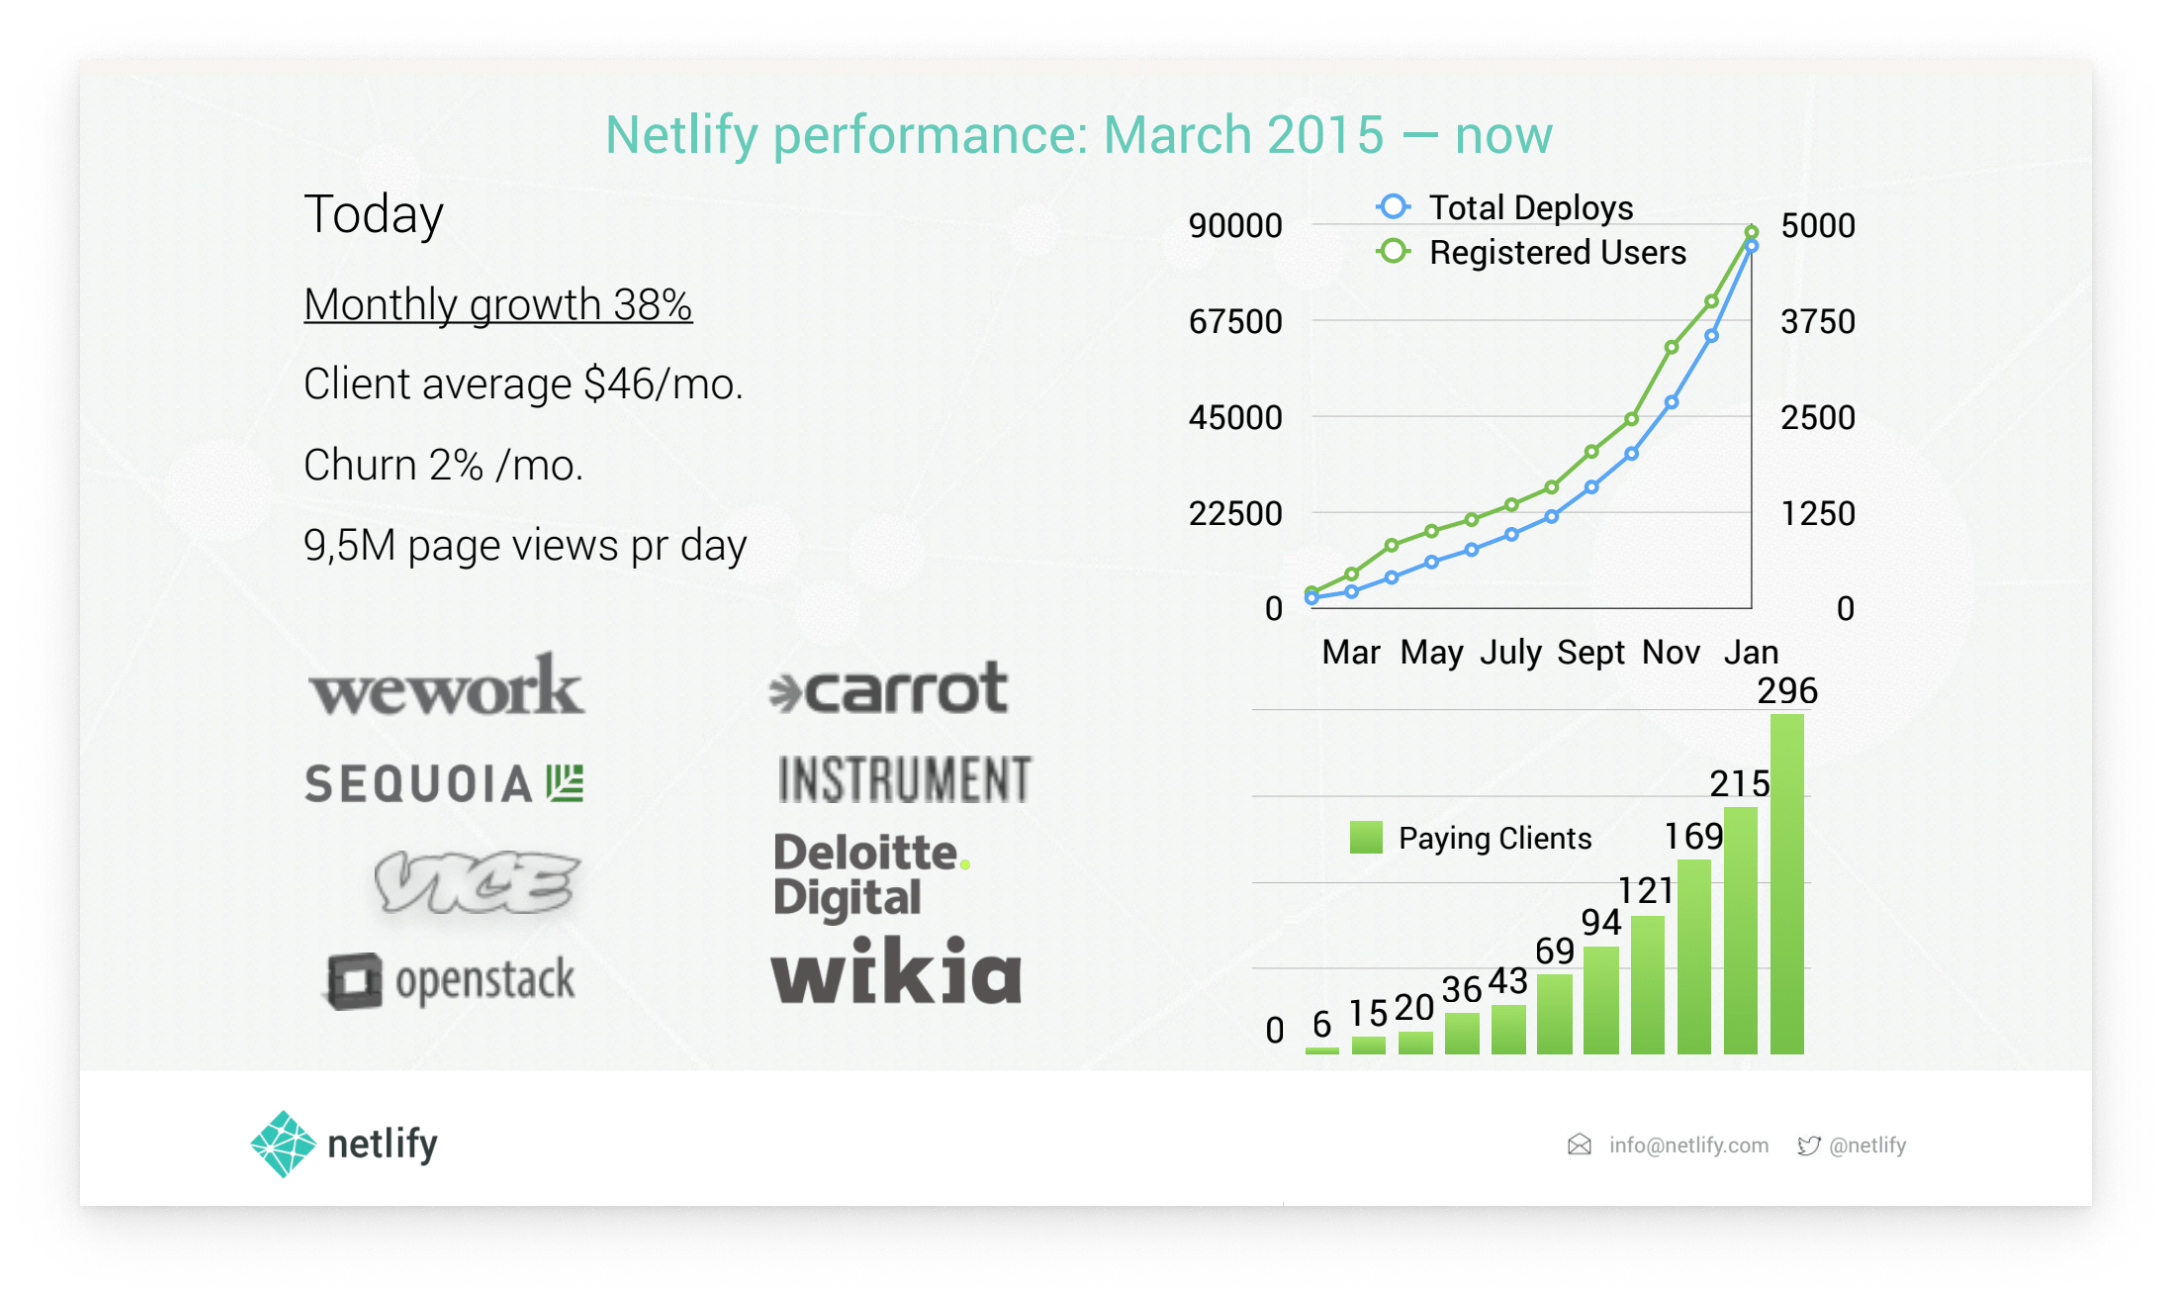 A slide from Netlify’s pitch deck which shows “Netlify performance: March 2015 – now” featuring a couple of graphs, customer logos, and text detailing monthly growth.